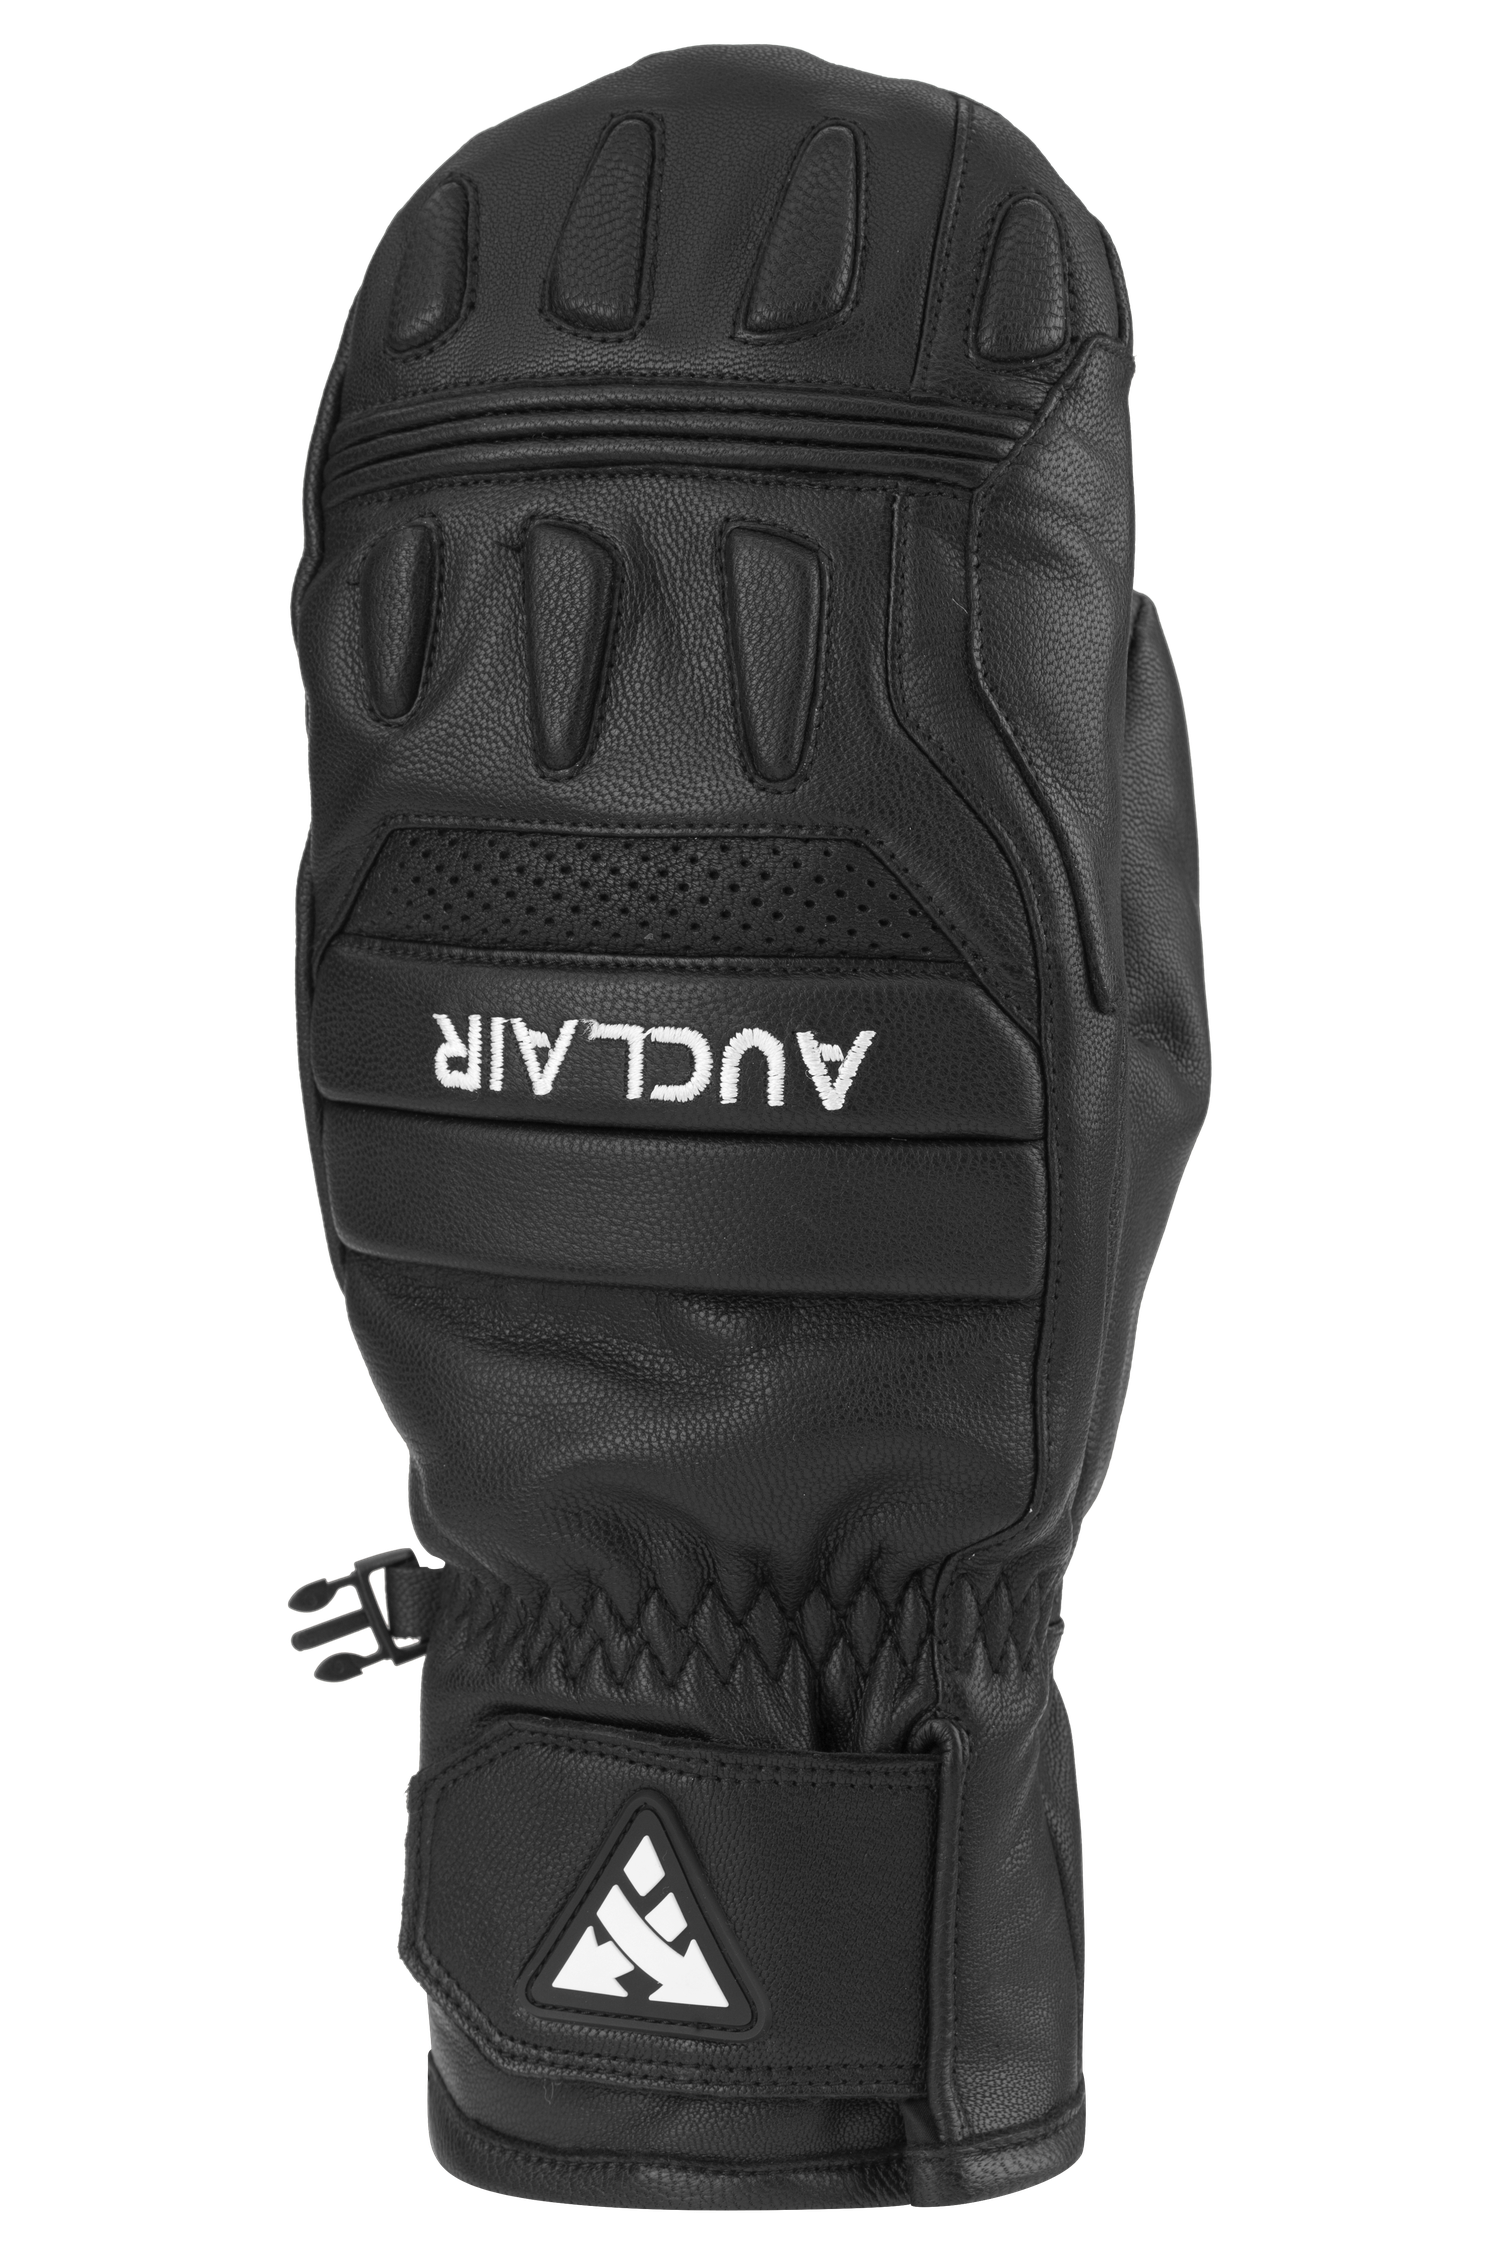 Son Of T 3 Mitts - Adult, Black